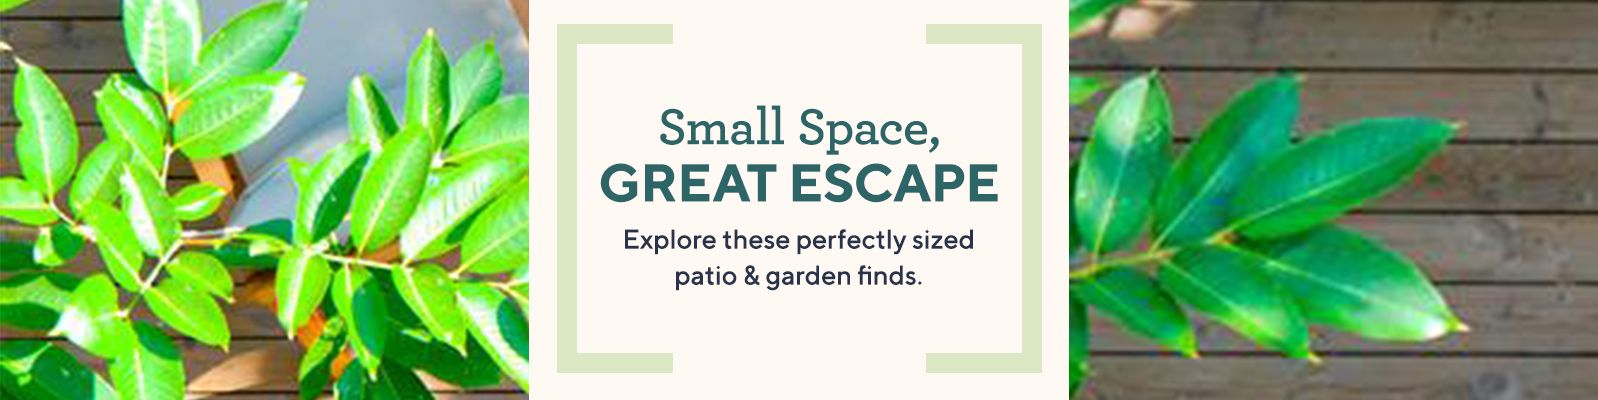 Small Space, Great Escape - Explore these perfectly sized patio & garden finds. 